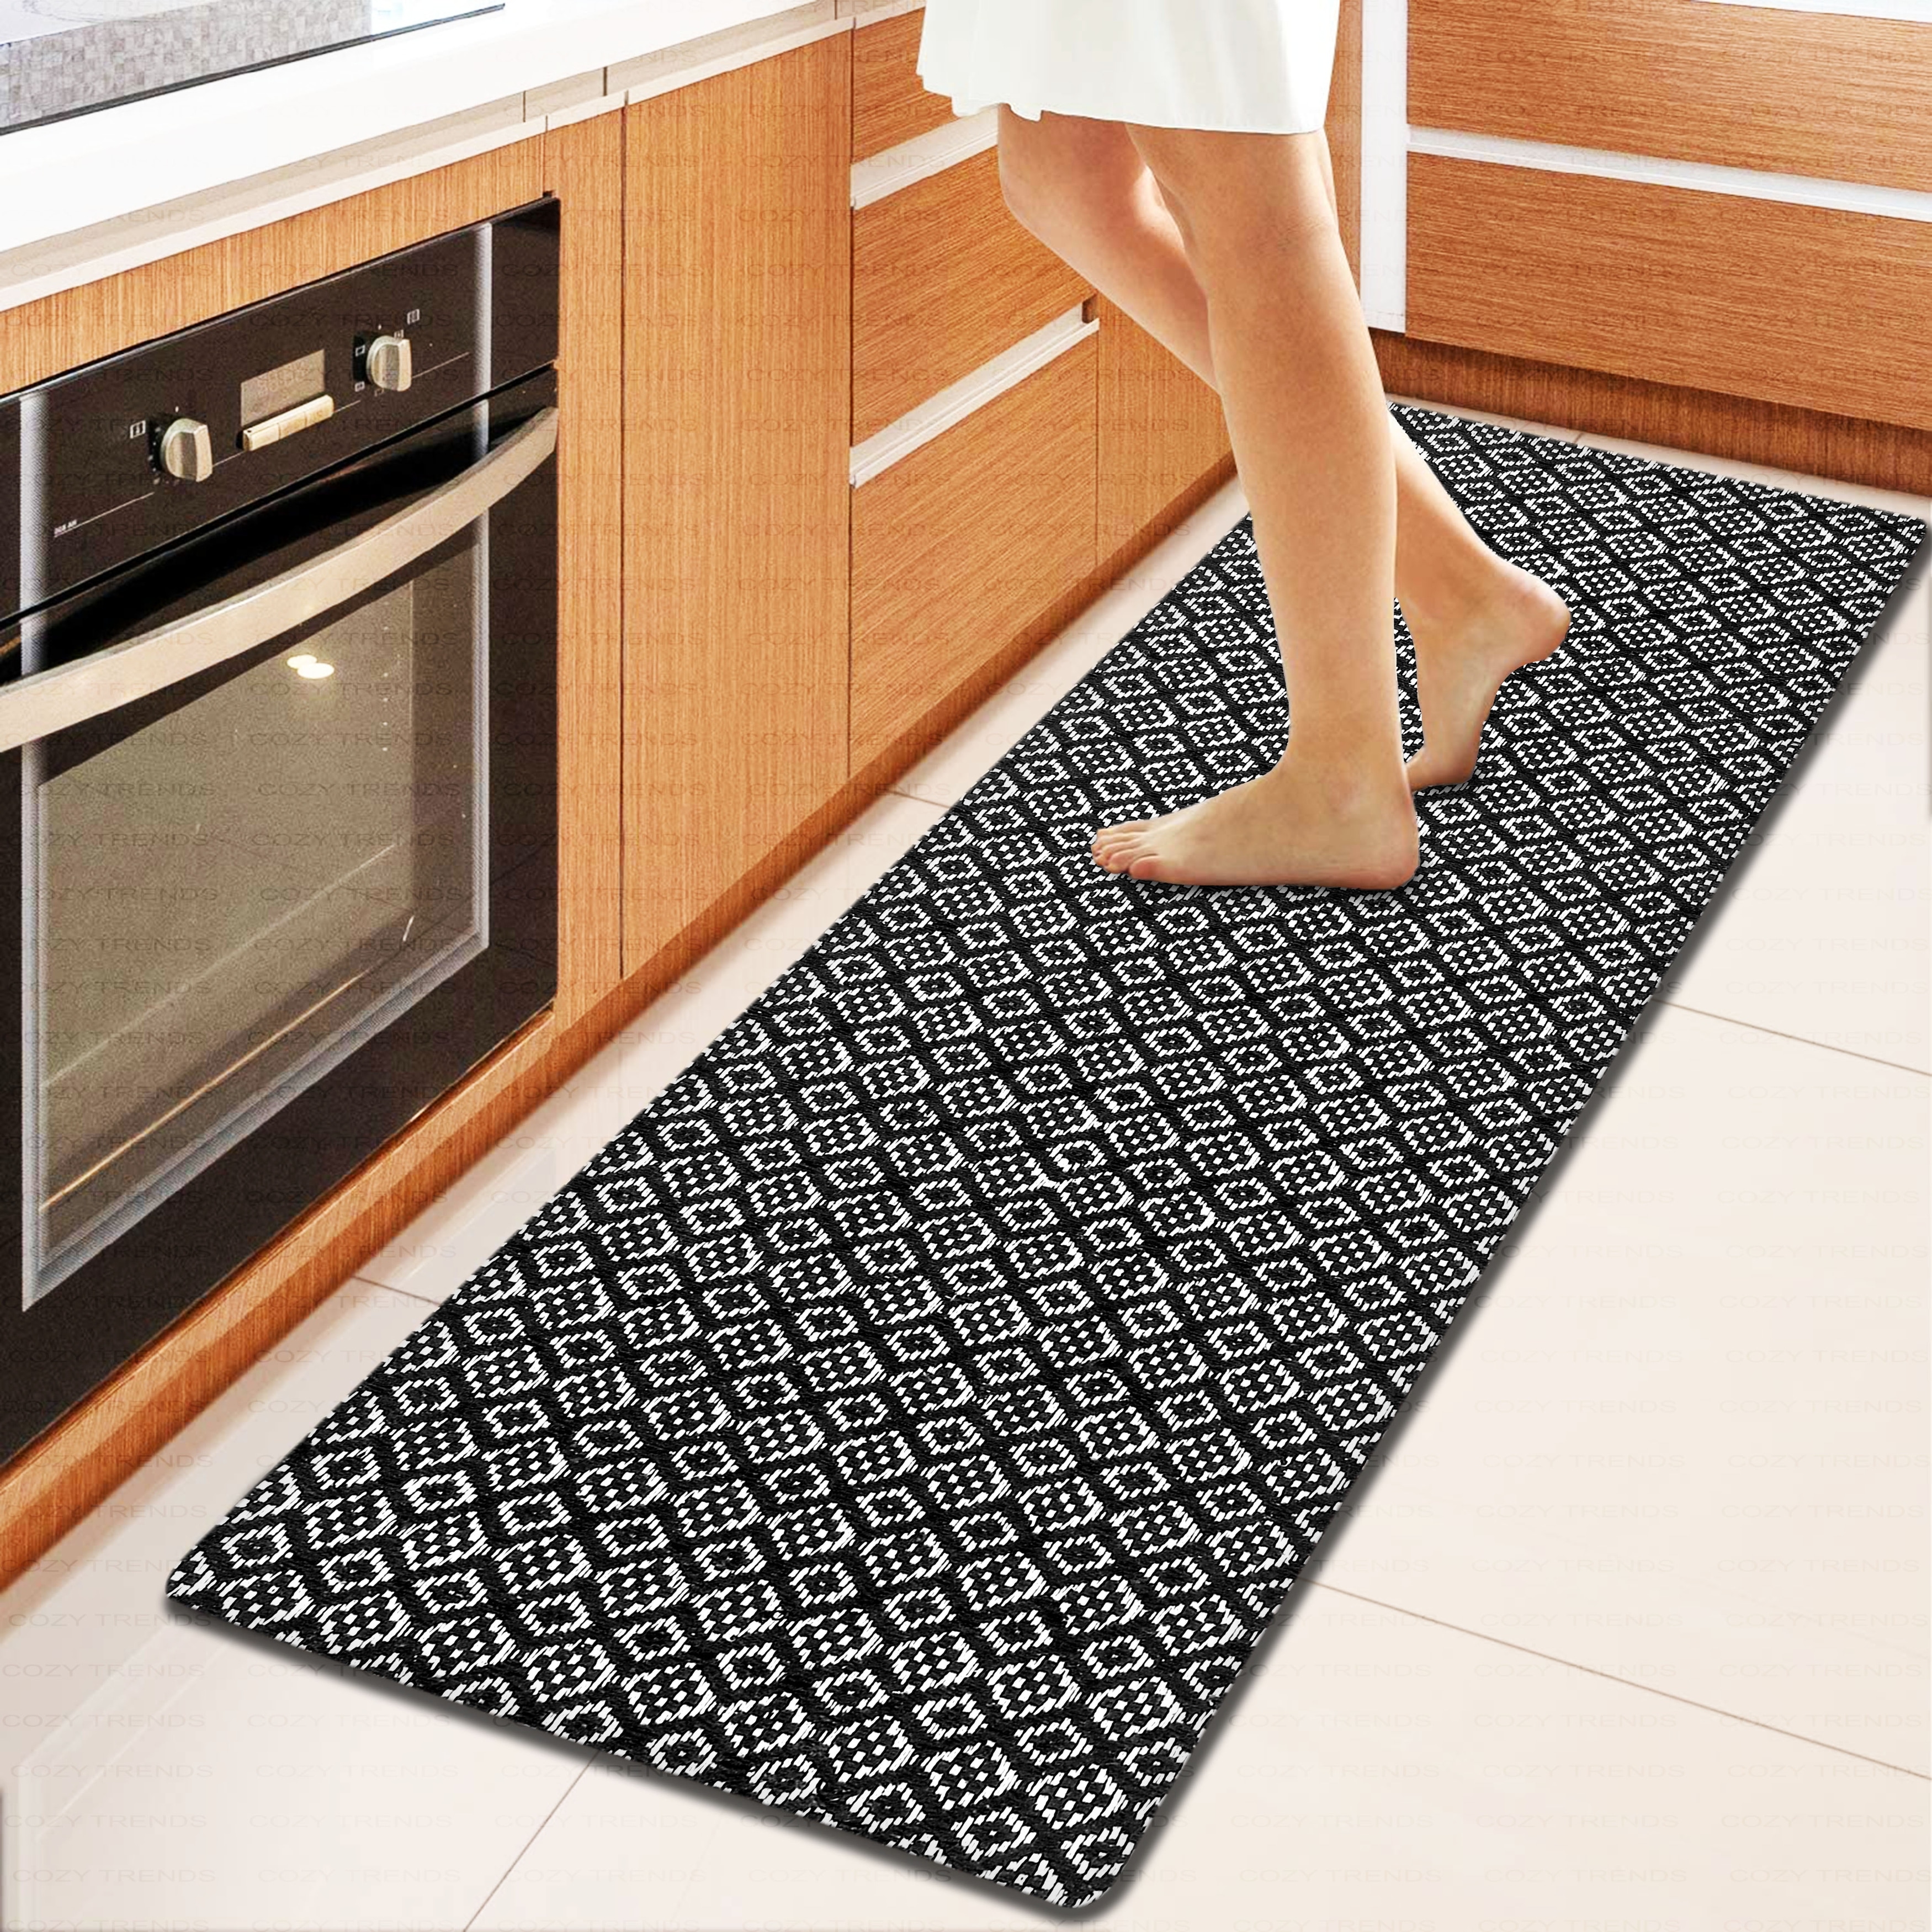 https://ak1.ostkcdn.com/images/products/is/images/direct/8f1fdef5c092e3287dba7001b622c4d9227402d9/Kitchen-Runner-Rug--Mat-Cushioned-Cotton-Hand-Woven-Anti-Fatigue-Mat-Kitchen-Bathroom-Bed-side-18x48%27%27.jpg